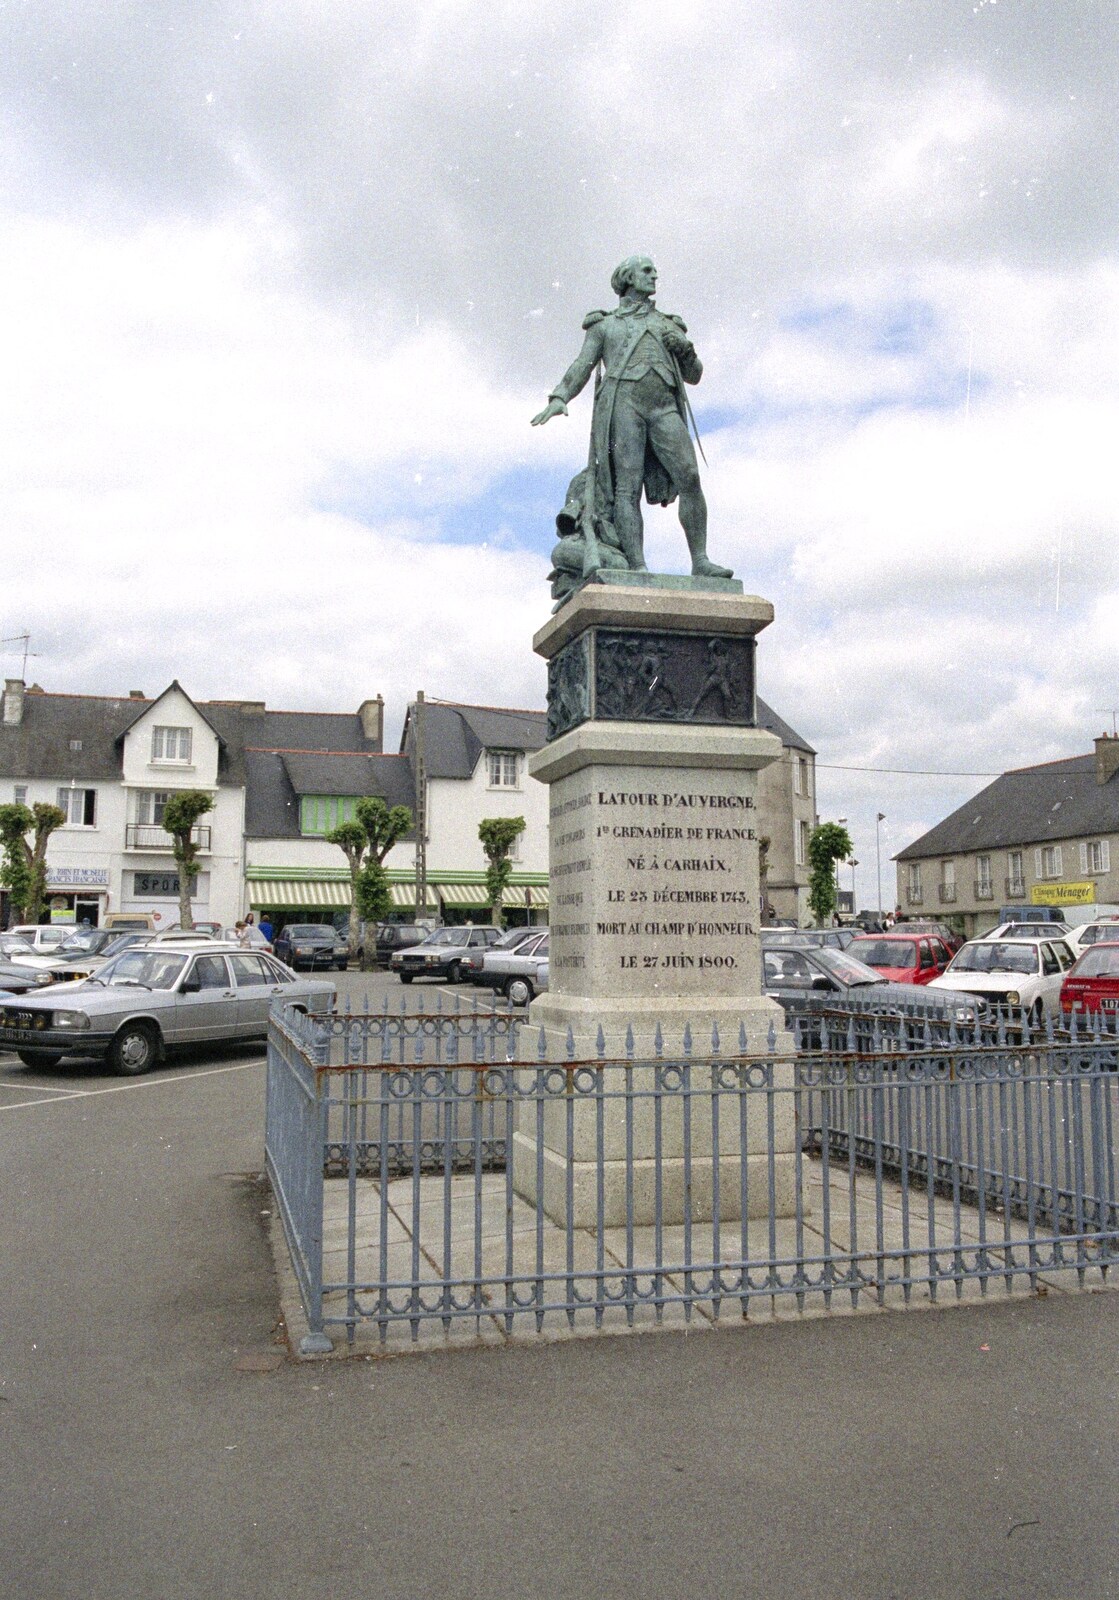 A Trip To Huelgoat, Brittany, France - 11th June 1990: The statue of Latour d'Auvergne in Carhaix.